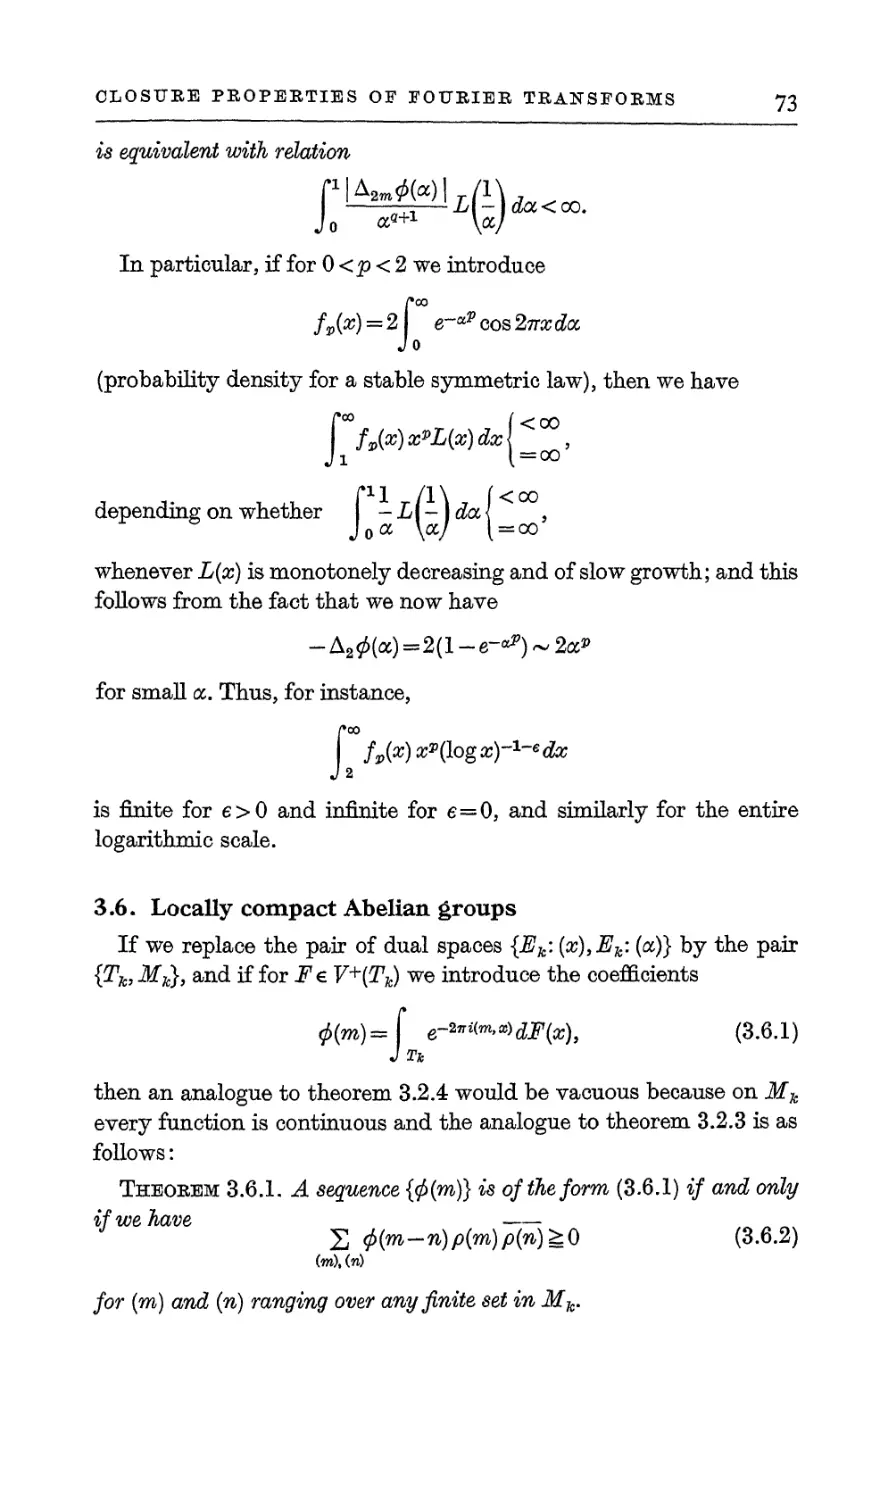 3.6. Locally compact Abelian groups